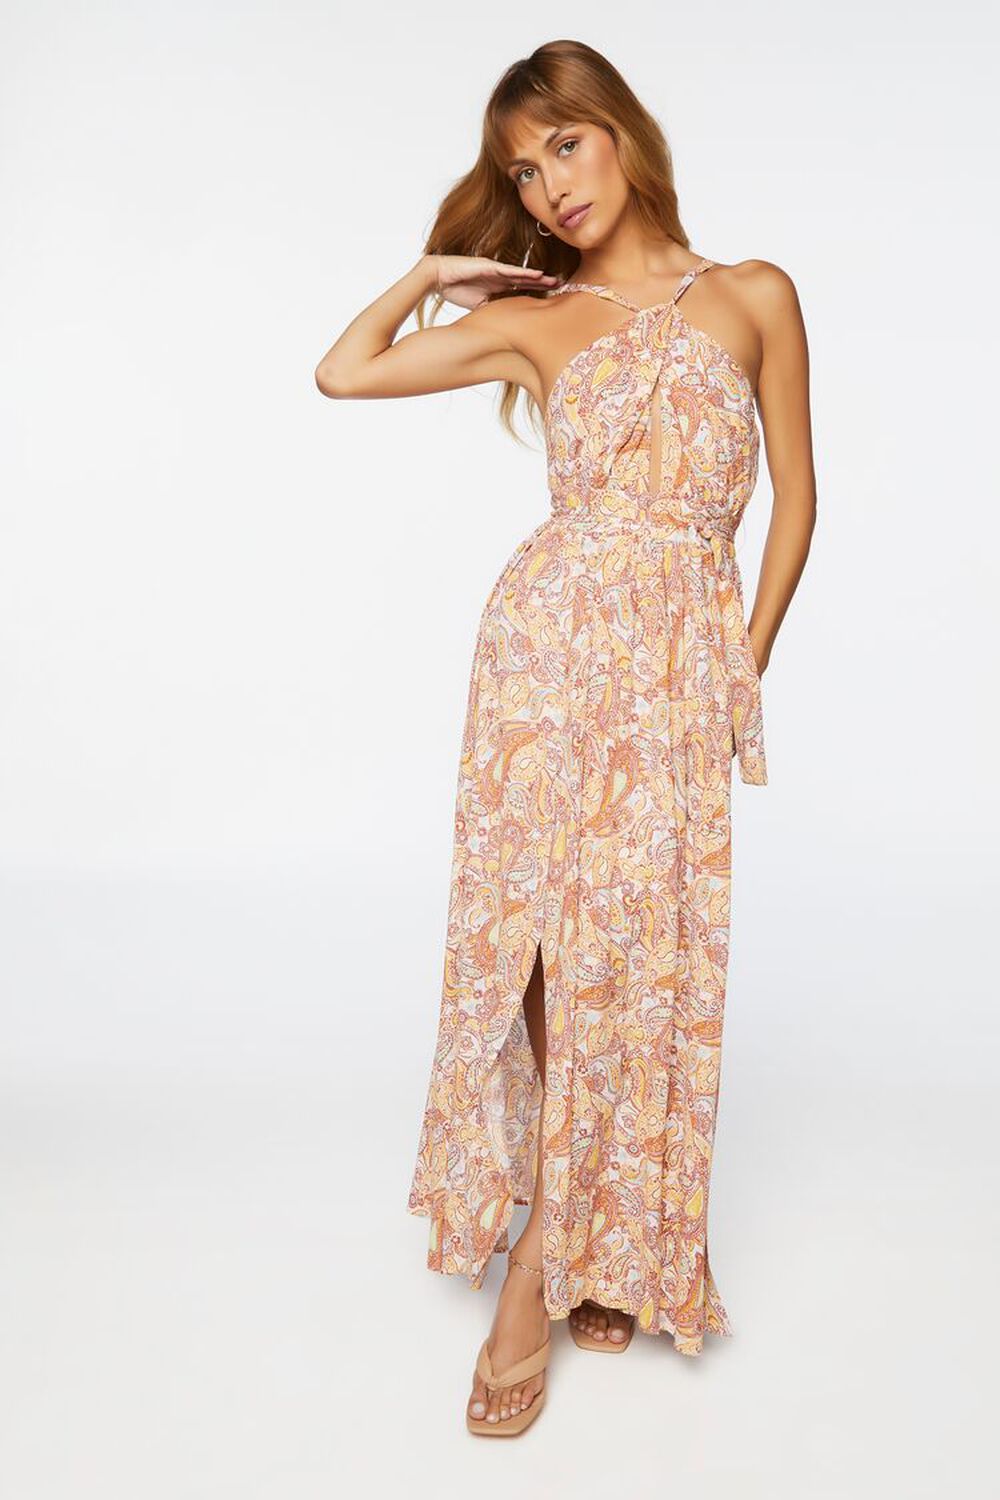 PINK/MULTI Paisley Belted Halter Maxi Dress, image 1